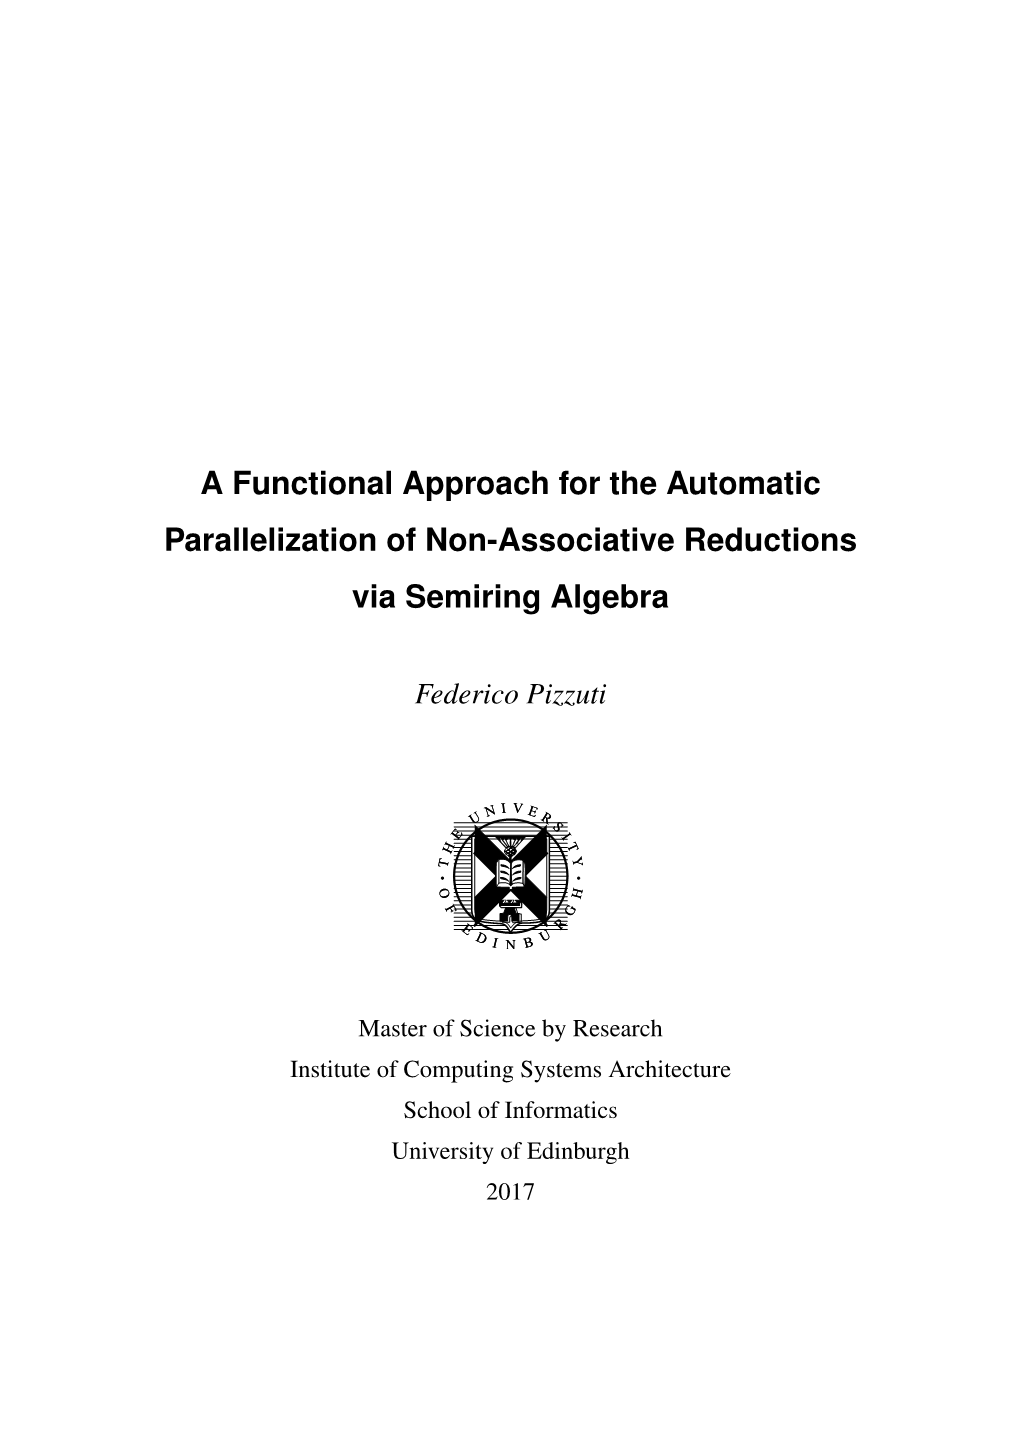 A Functional Approach for the Automatic Parallelization of Non-Associative Reductions Via Semiring Algebra